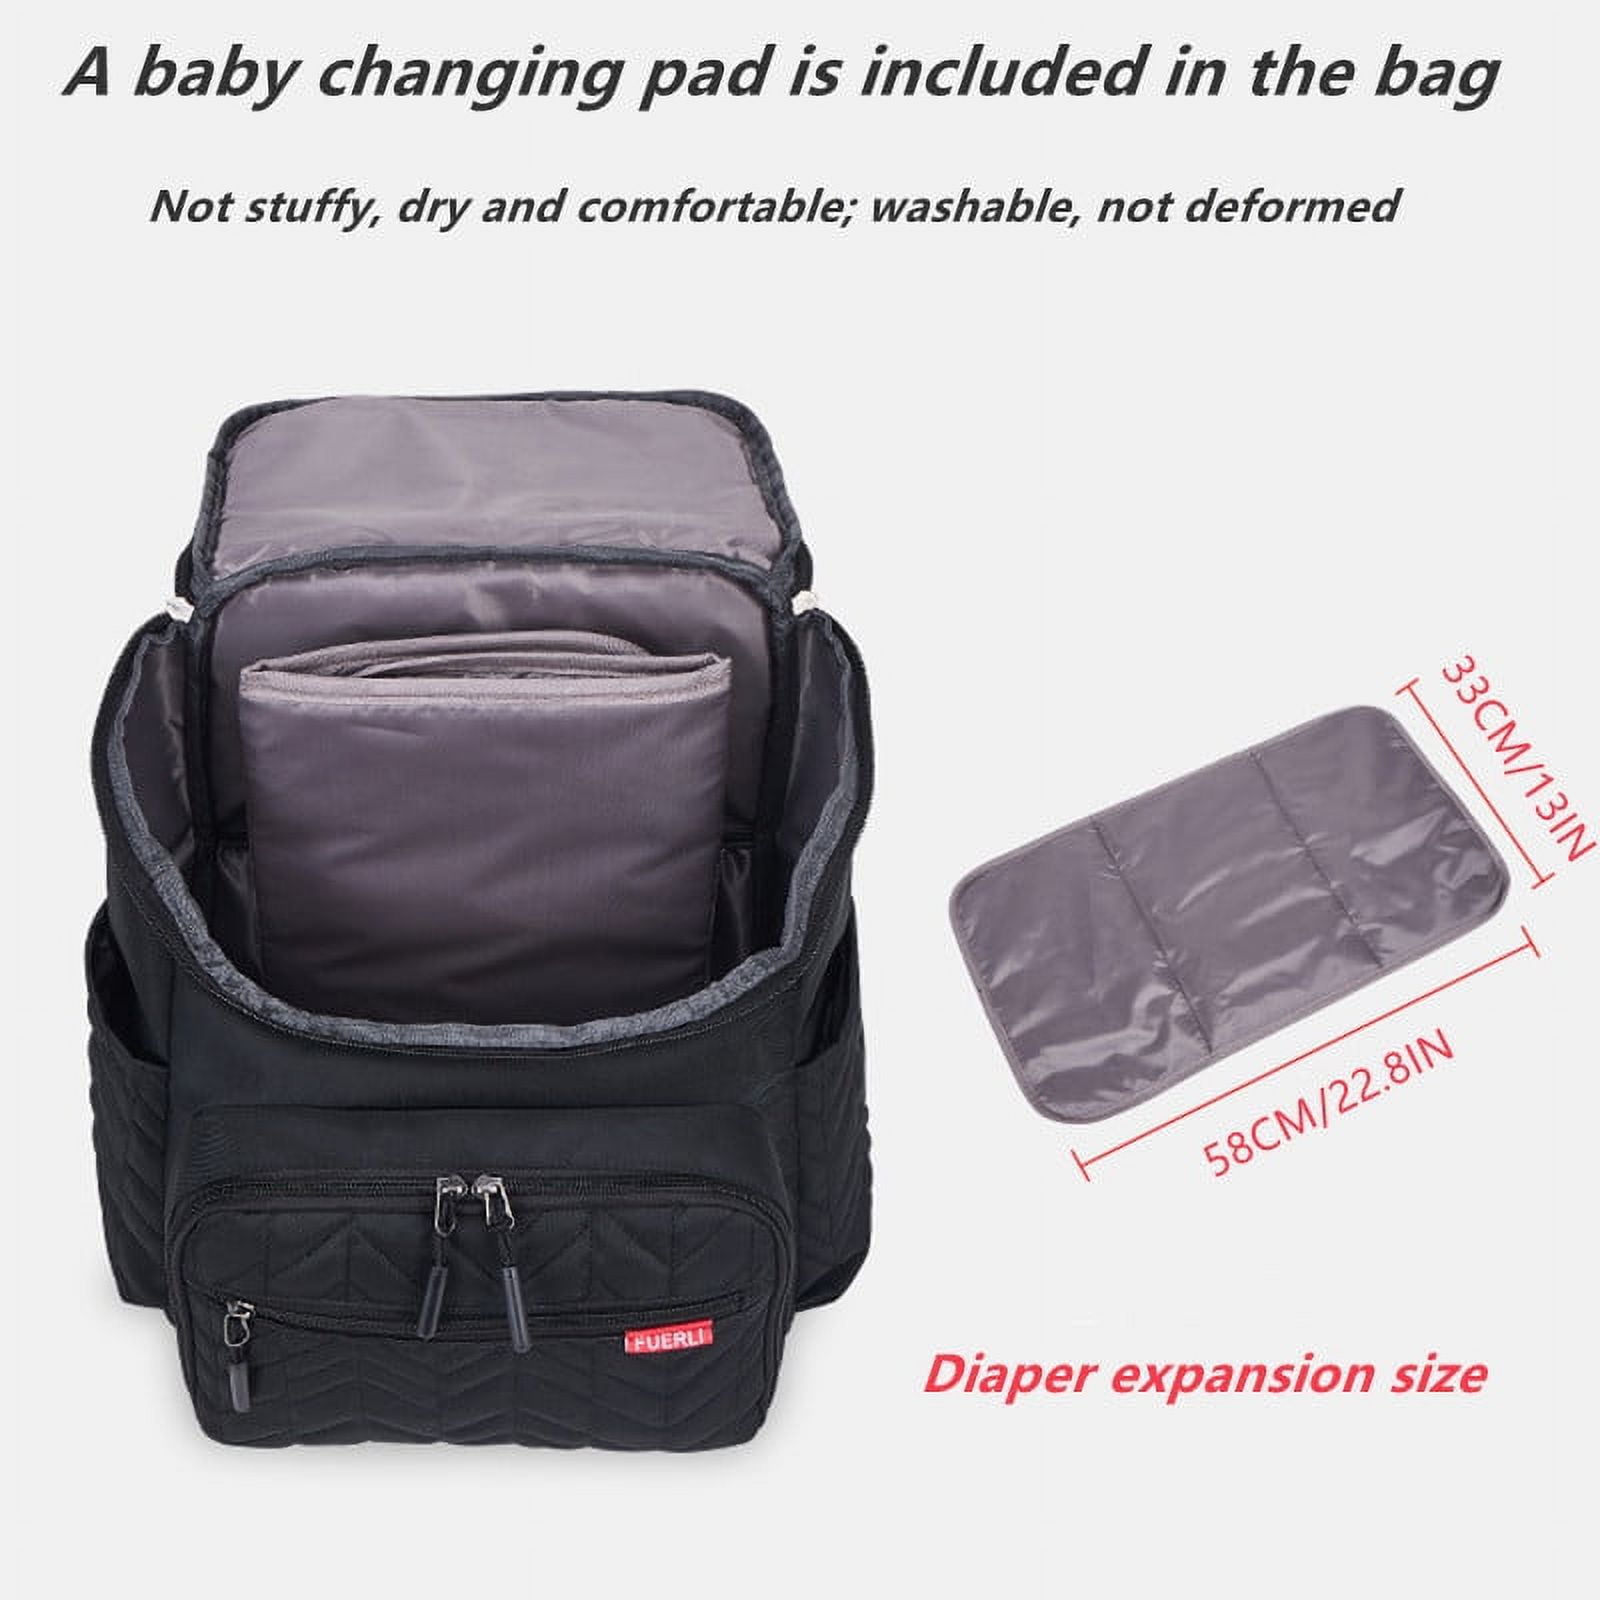 Bamomby Diaper Bag Backpack, Bamomby Multi-function Waterproof Travel Backpack Nappy Bags for Mom,Dad with Insulated Pockets, Changing